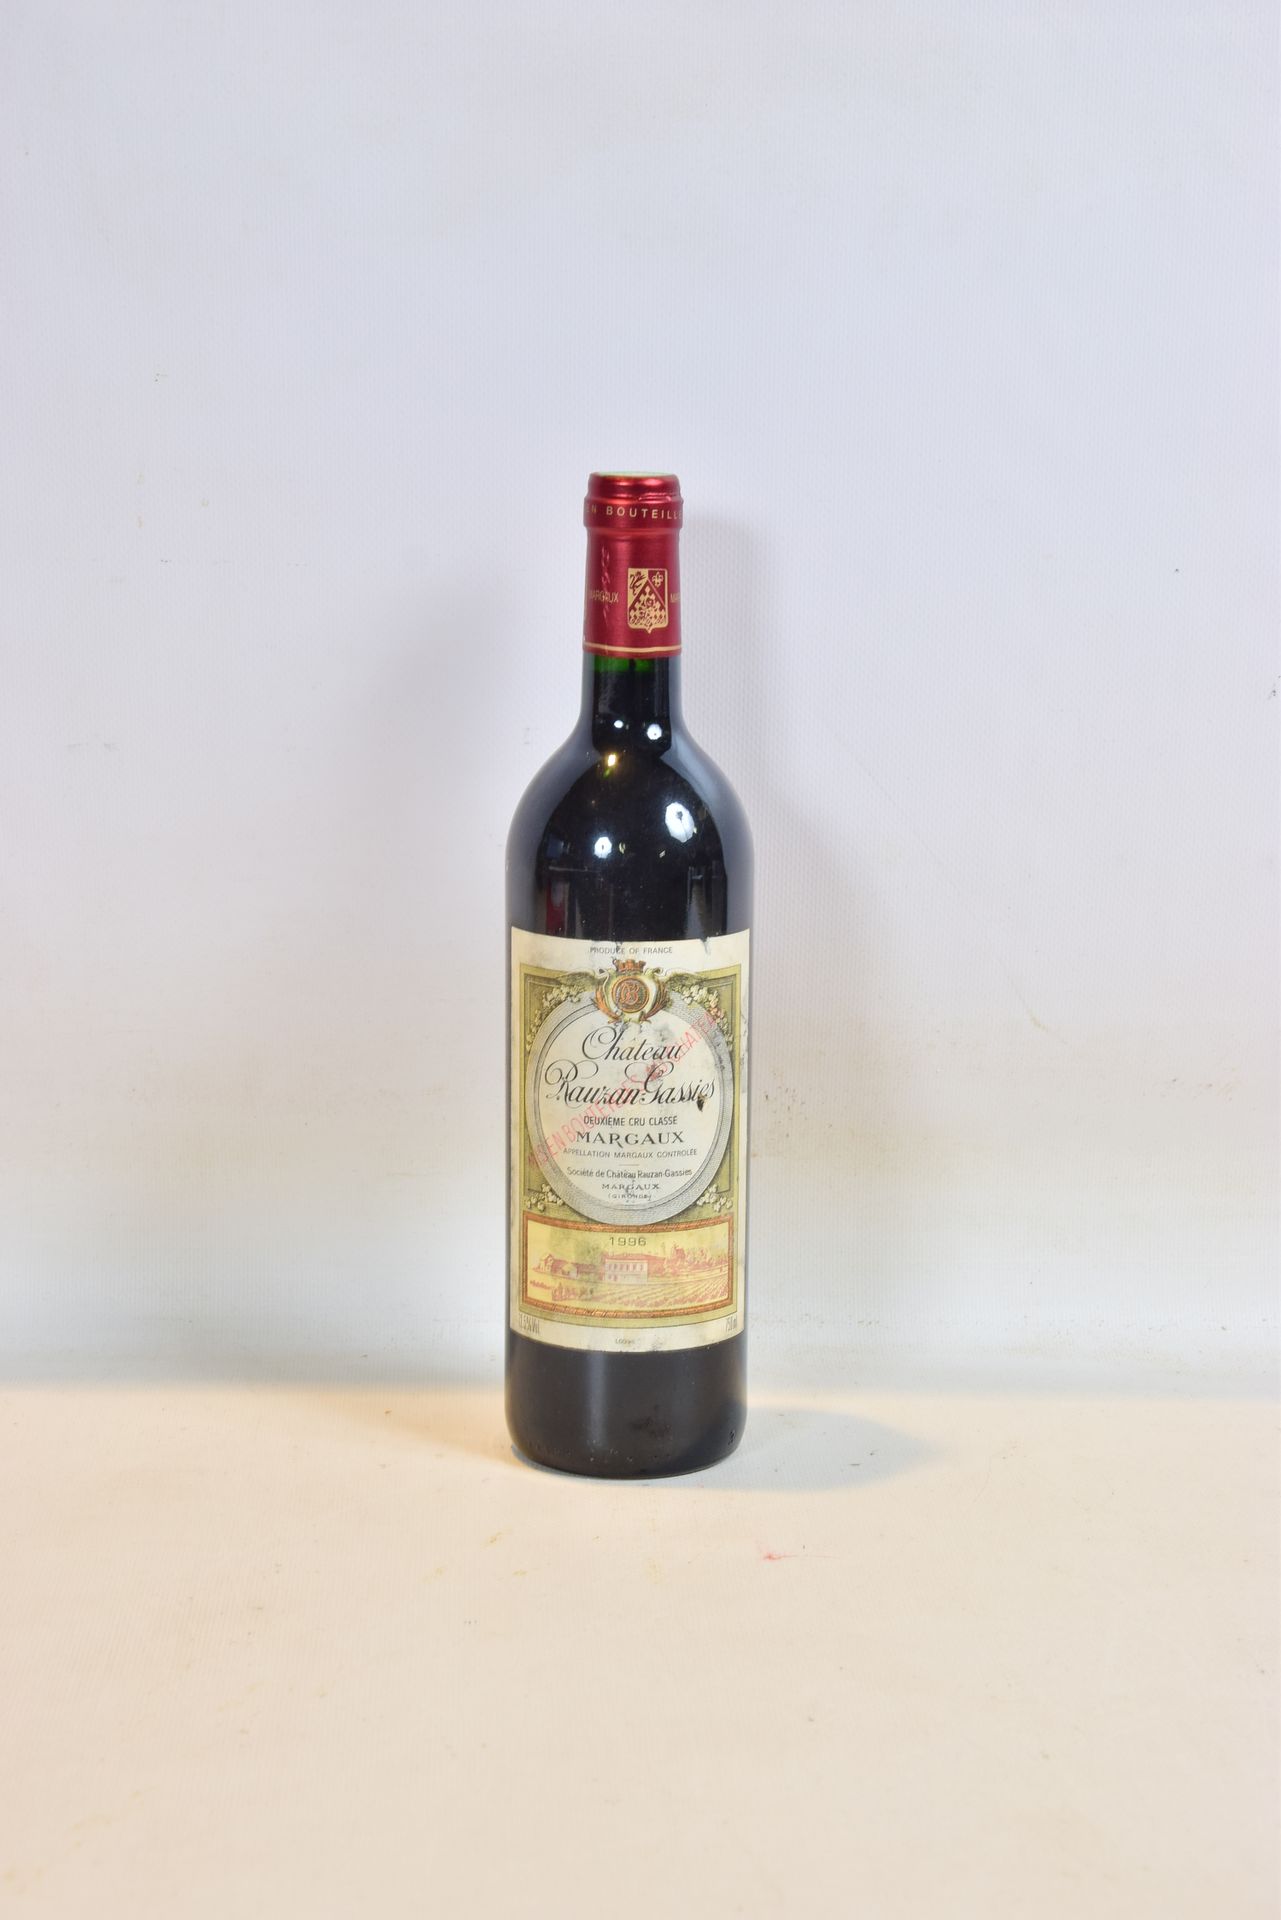 Null 1 Blle CH. RAUZAN GASSIES Margaux GCC 1996

	Faded, stained (1 small tear).&hellip;